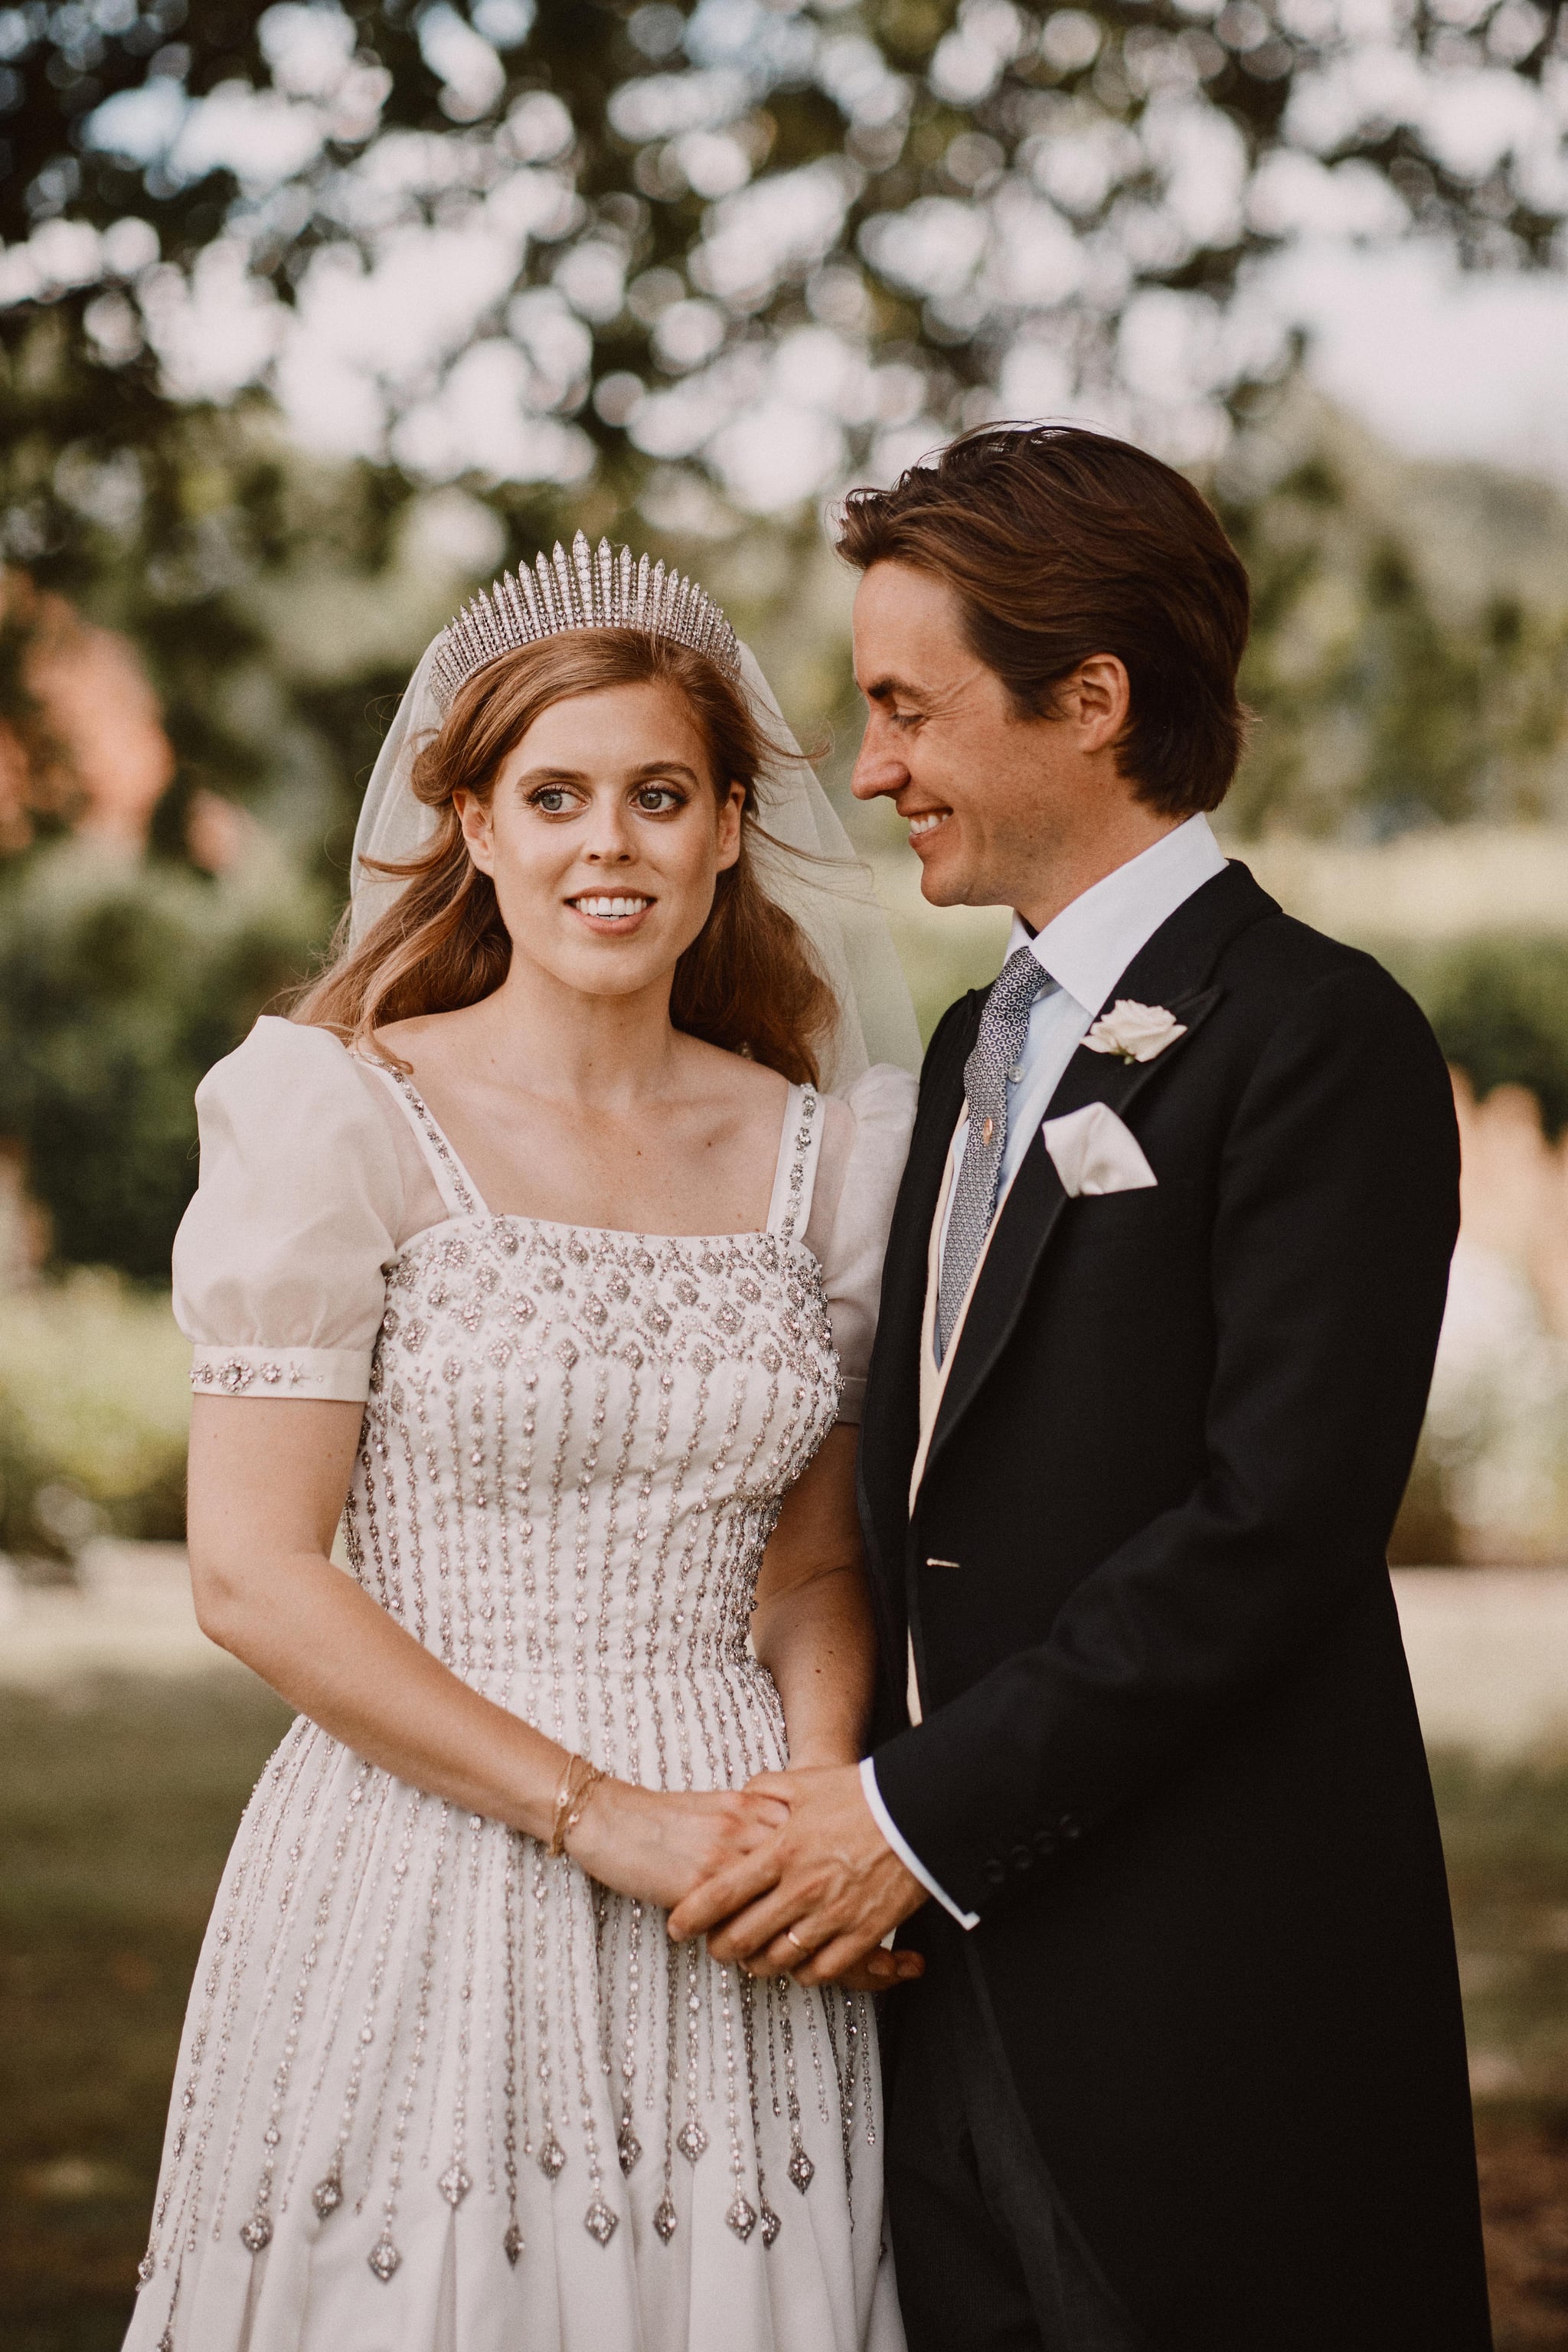 WINDSOR, UNITED KINGDOM - JULY 18: NEWS EDITORIAL USE ONLY. NO COMMERCIAL USE. NO MERCHANDISING, ADVERTISING, SOUVENIRS, MEMORABILIA or COLOURABLY SIMILAR. NOT FOR USE AFTER 18th January 2021 WITHOUT PRIOR PERMISSION FROM BUCKINGHAM PALACE. NO CROPPING. In this handout image released by the Royal Communications, Princess Beatrice and Edoardo Mapelli Mozzi are photographed after their wedding in the grounds of Royal Lodge on July 18, 2020 in Windsor, United Kingdom. (Photo by Benjamin Wheeler via Getty Images) Copyright in the photograph is vested in Princess Beatrice and Edoardo Mapelli Mozzi and Benjamin Wheeler. Publications are asked to credit the photograph to Benjamin Wheeler. No charge should be made for the supply, release or publication of the photograph. The photograph must not be digitally enhanced, manipulated or modified in any manner or form and must include all of the individuals in the photograph when published. NOTE TO EDITORS: This handout photo may only be used in for editorial reporting purposes for the contemporaneous illustration of events, things or the people in the image or facts mentioned in the caption. Reuse of the picture may require further permission from the copyright holder.